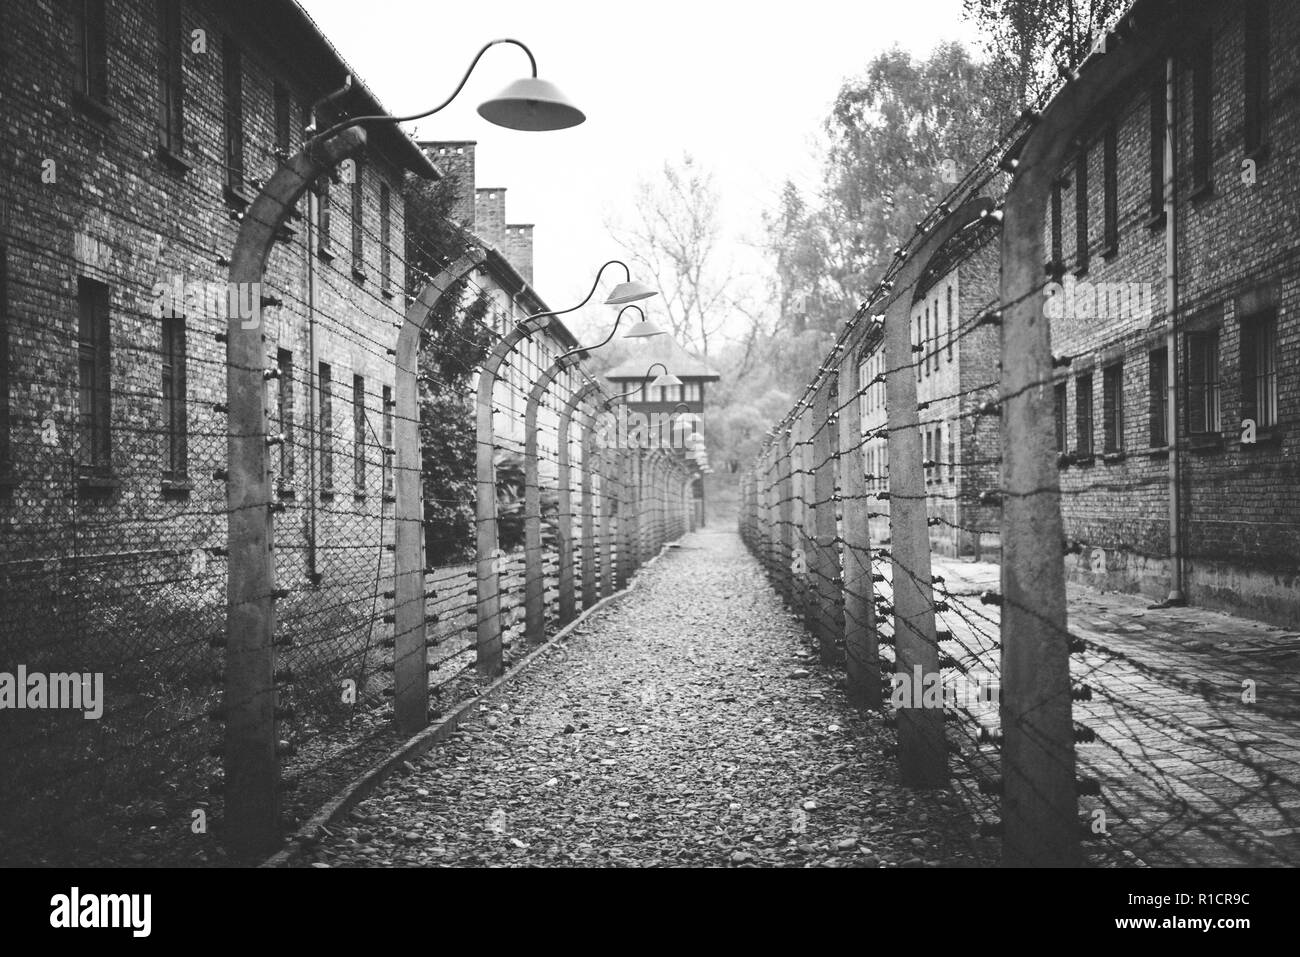 Auschwitz Nazi concentration and extermination camp. Electrified fences separating barracks. Auschwitz, German-occupied, Poland, Europe Stock Photo